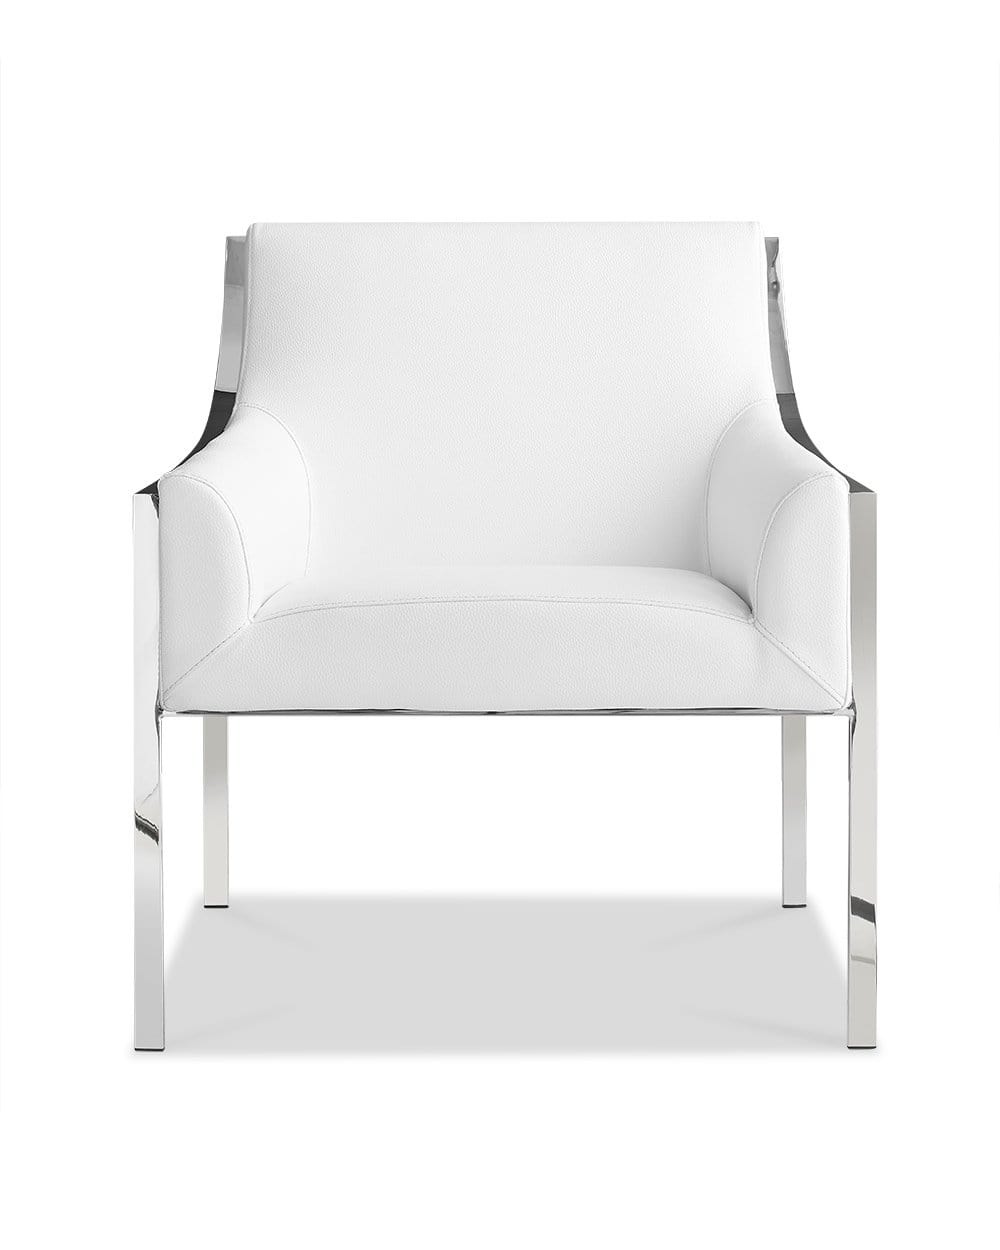 HomeRoots Outdoors Outdoor Chairs White / Wicker 31" X 33" X 30" White Stainless Steel Armed Chair